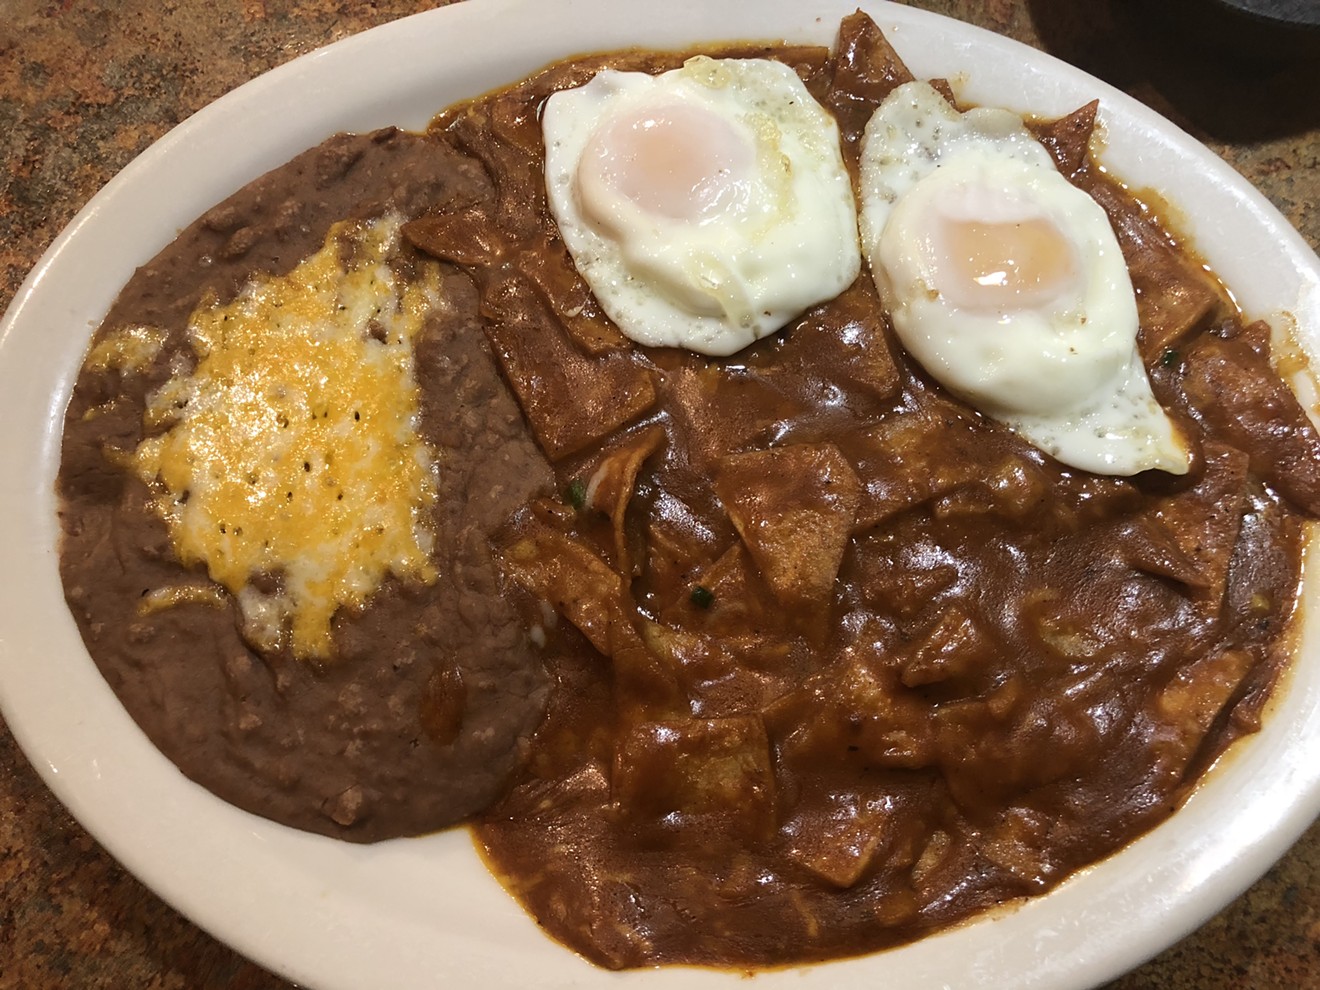 Chilaquiles rojo, with eggs over easy from Comedor Guadalajara.